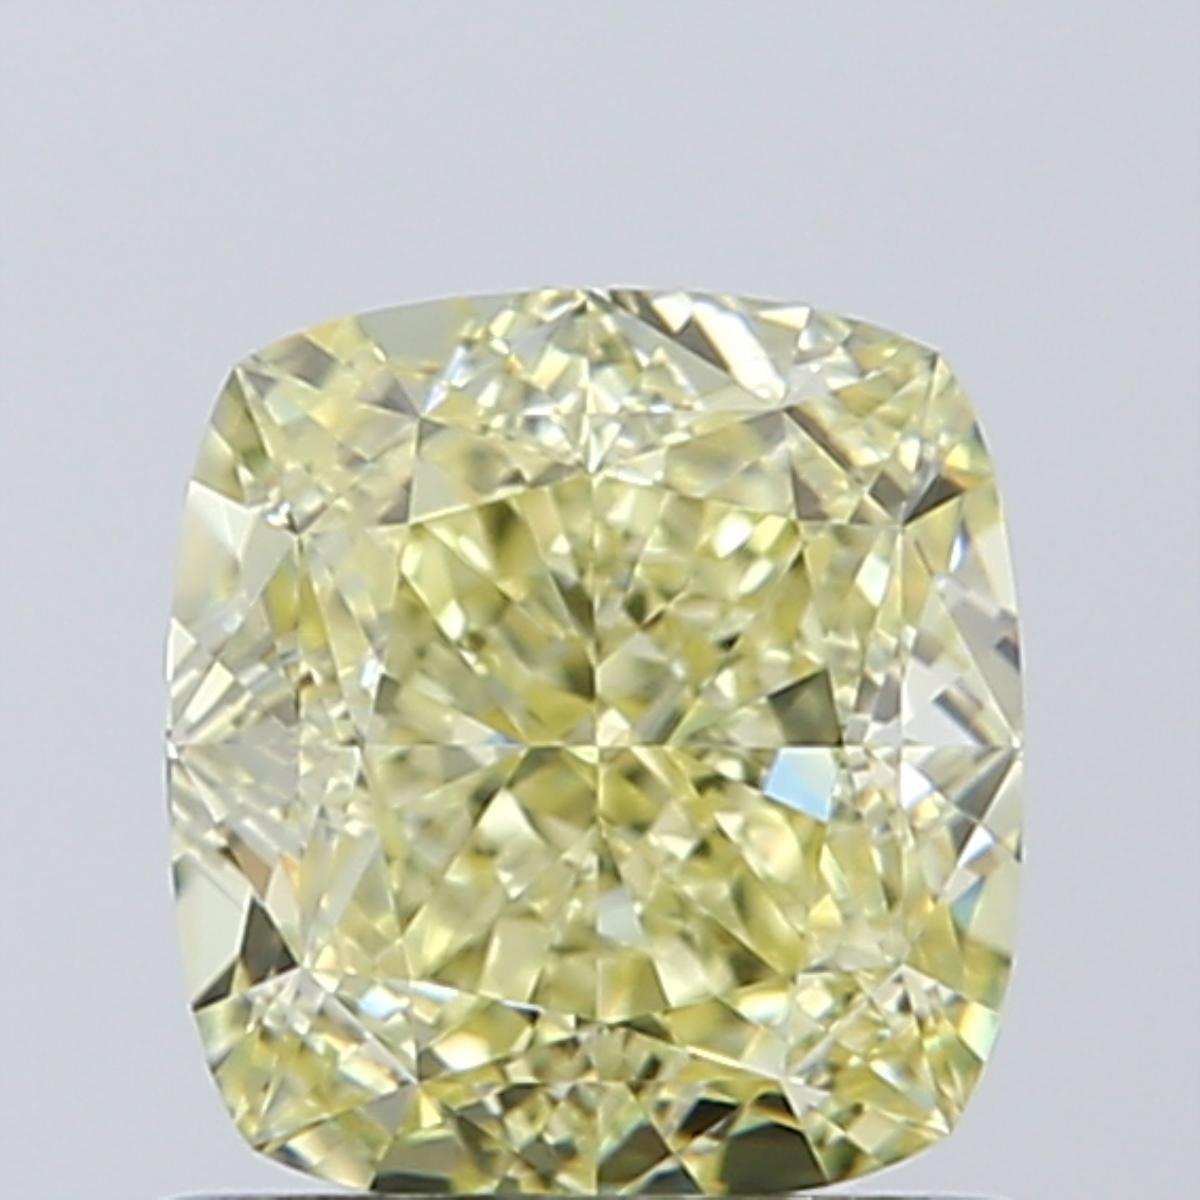 GIA Certified 1.00-1.05 Carat VS1, Fancy Yellow, Cushion Cut, Natural Diamond

Perfect Yellow Color Diamonds for perfect gifts.

5 C's:
Certificate: GIA
Carat: 1.00-1.05ct
Color: Natural Fancy Yellow
Clarity: VS1(Very Slightly Included)
Cut: